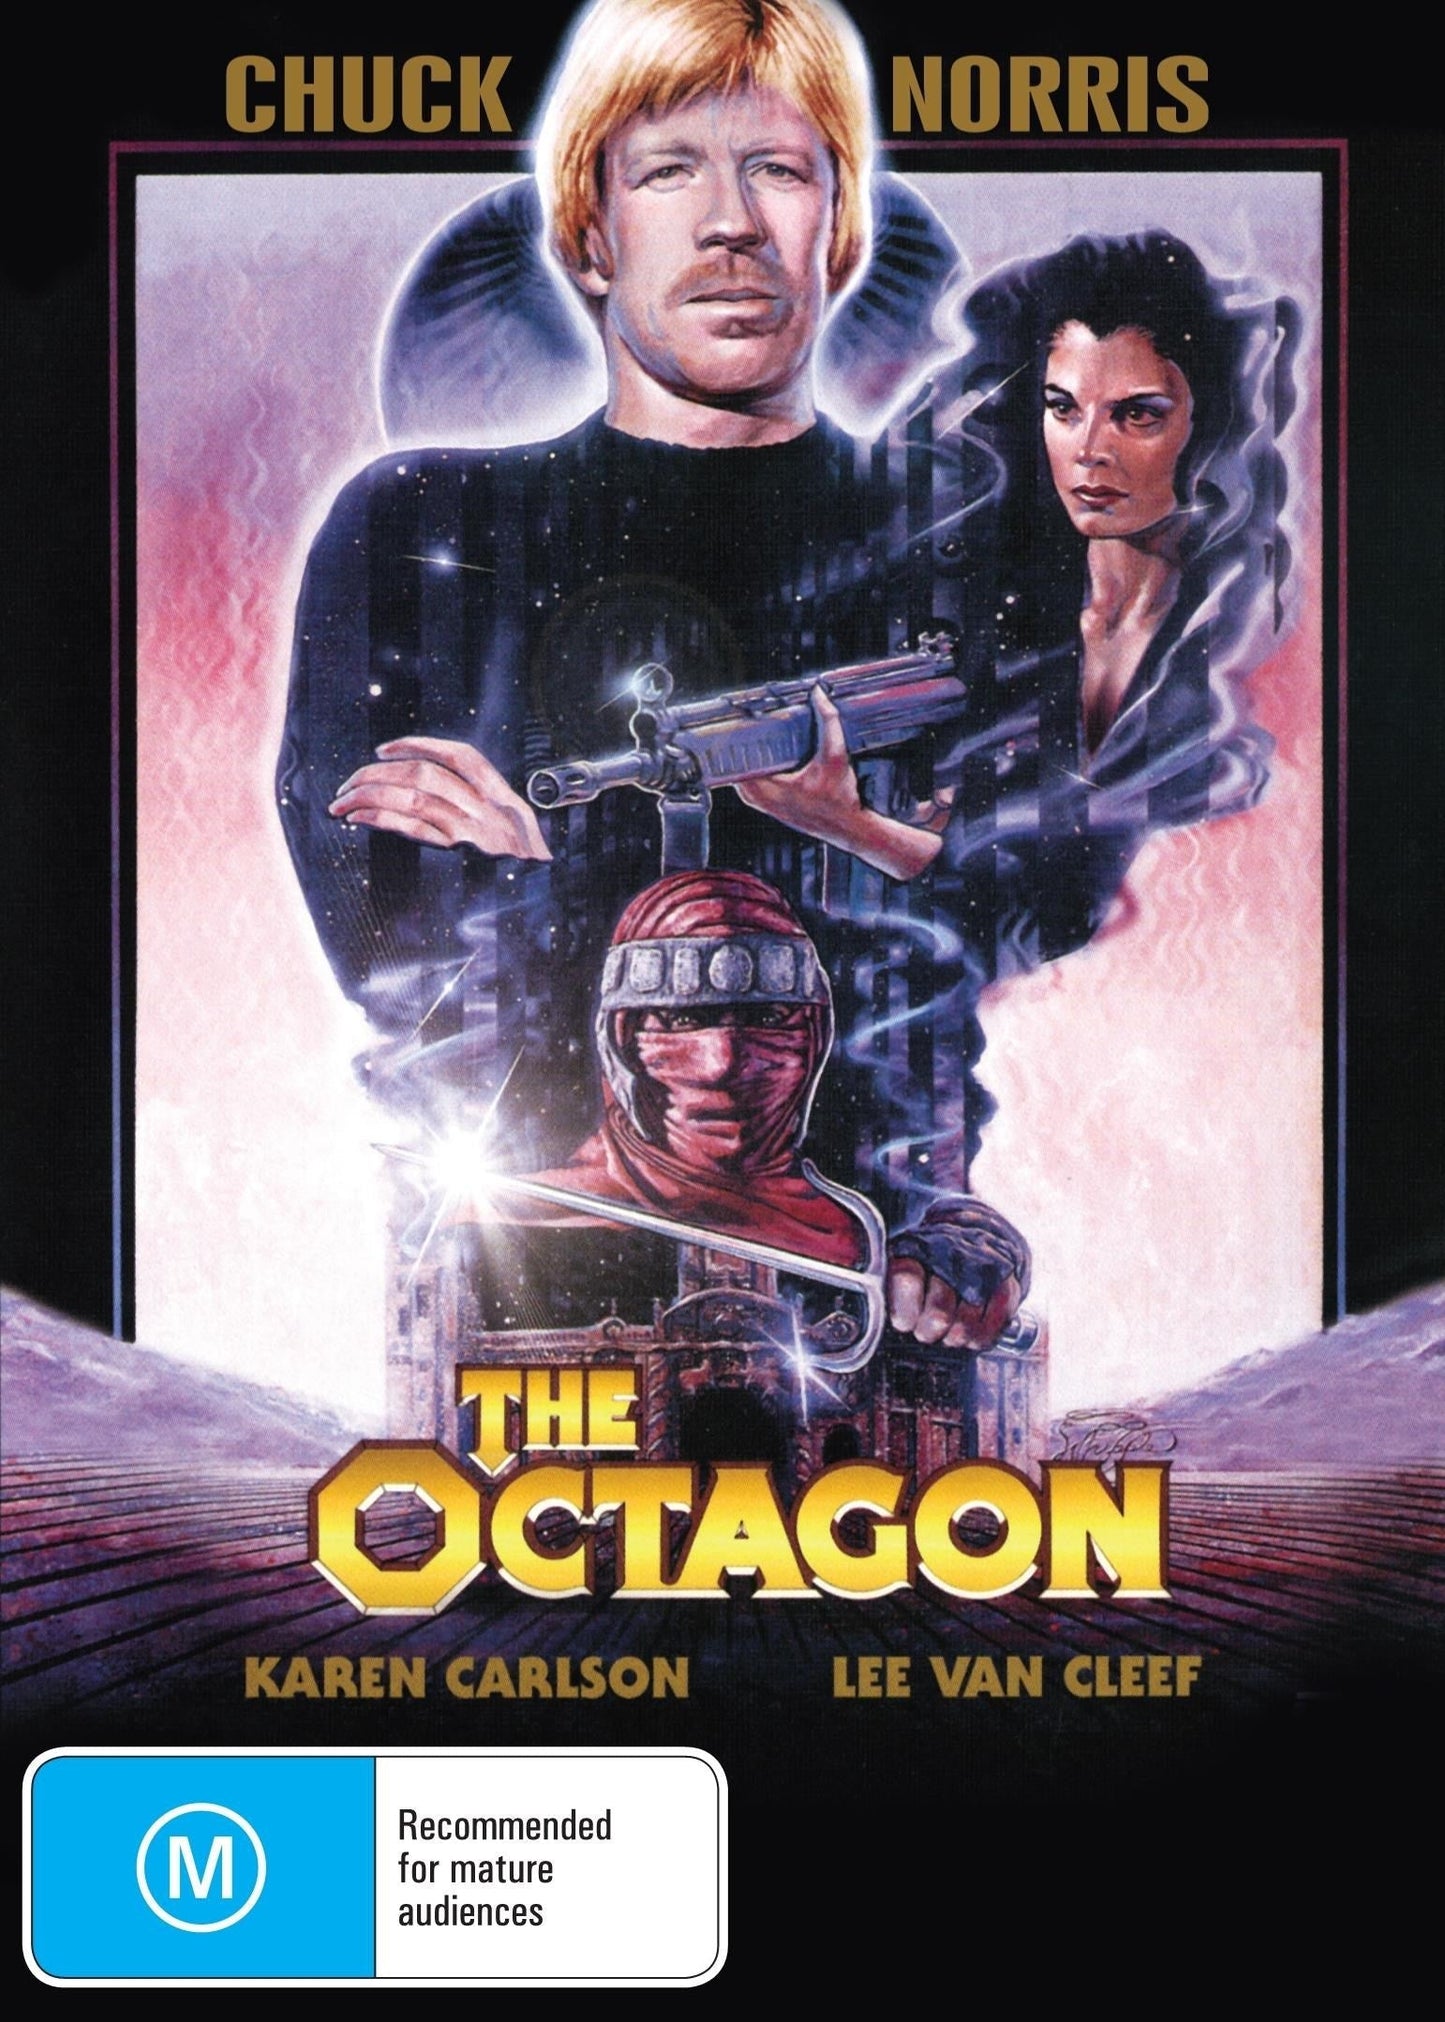 The Octagon rareandcollectibledvds